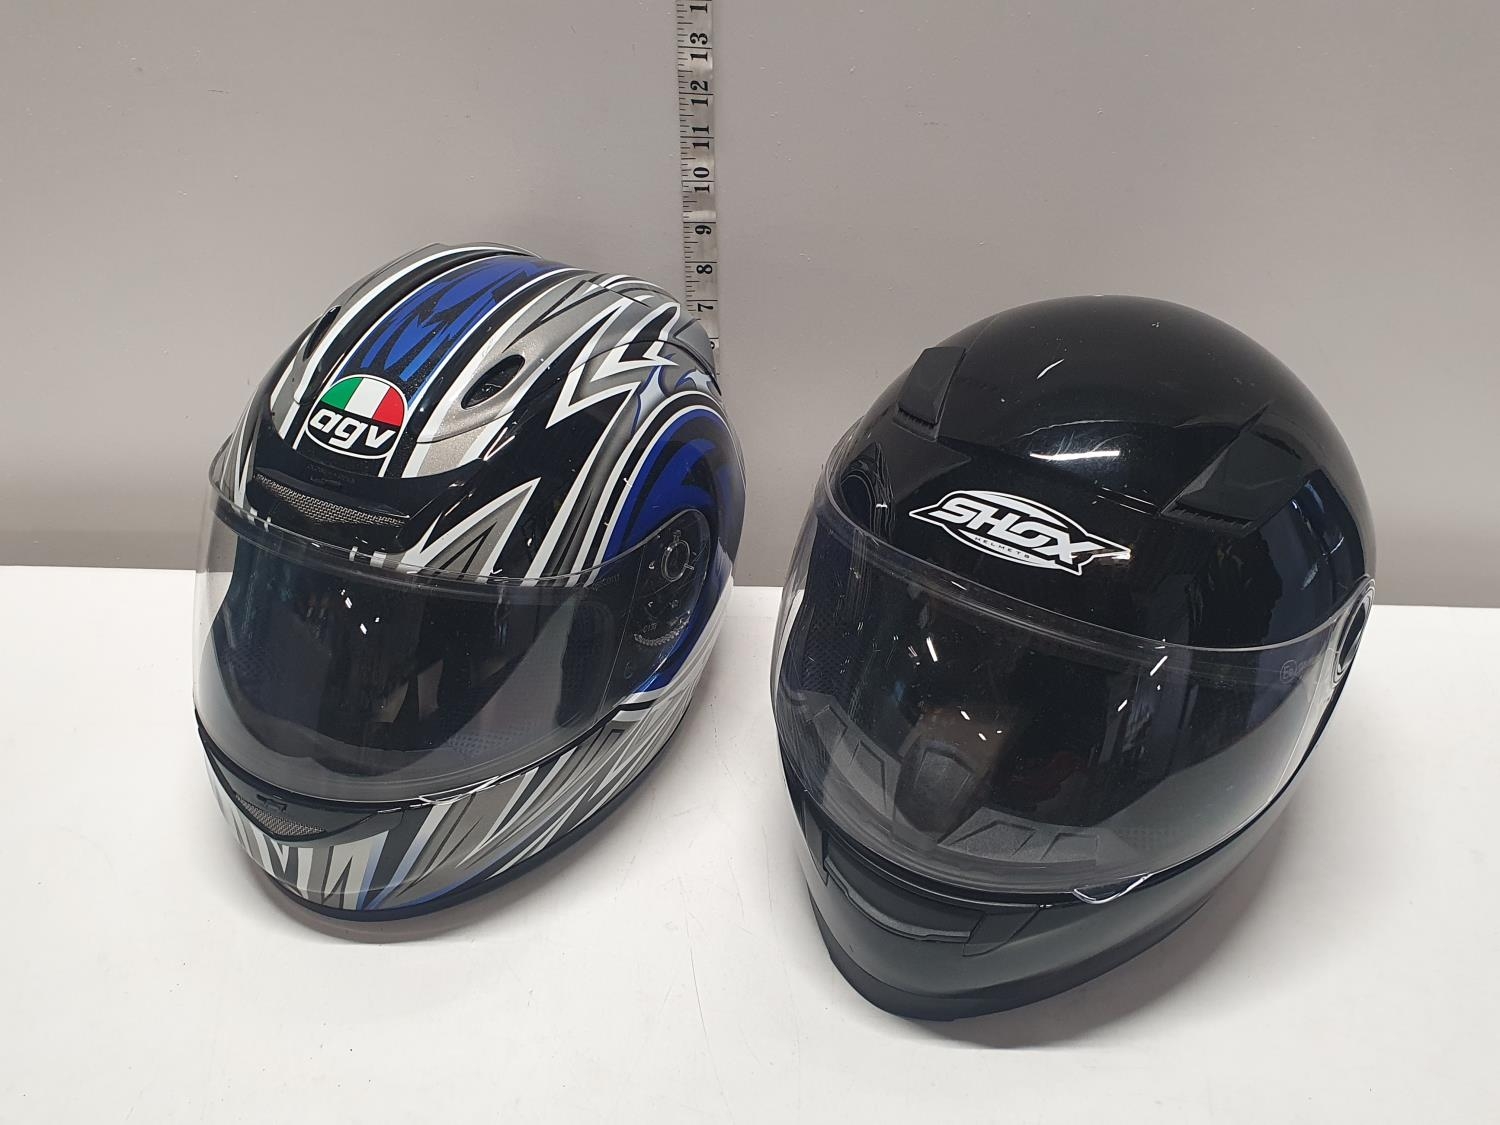 Two crash helmets, shipping unavailable